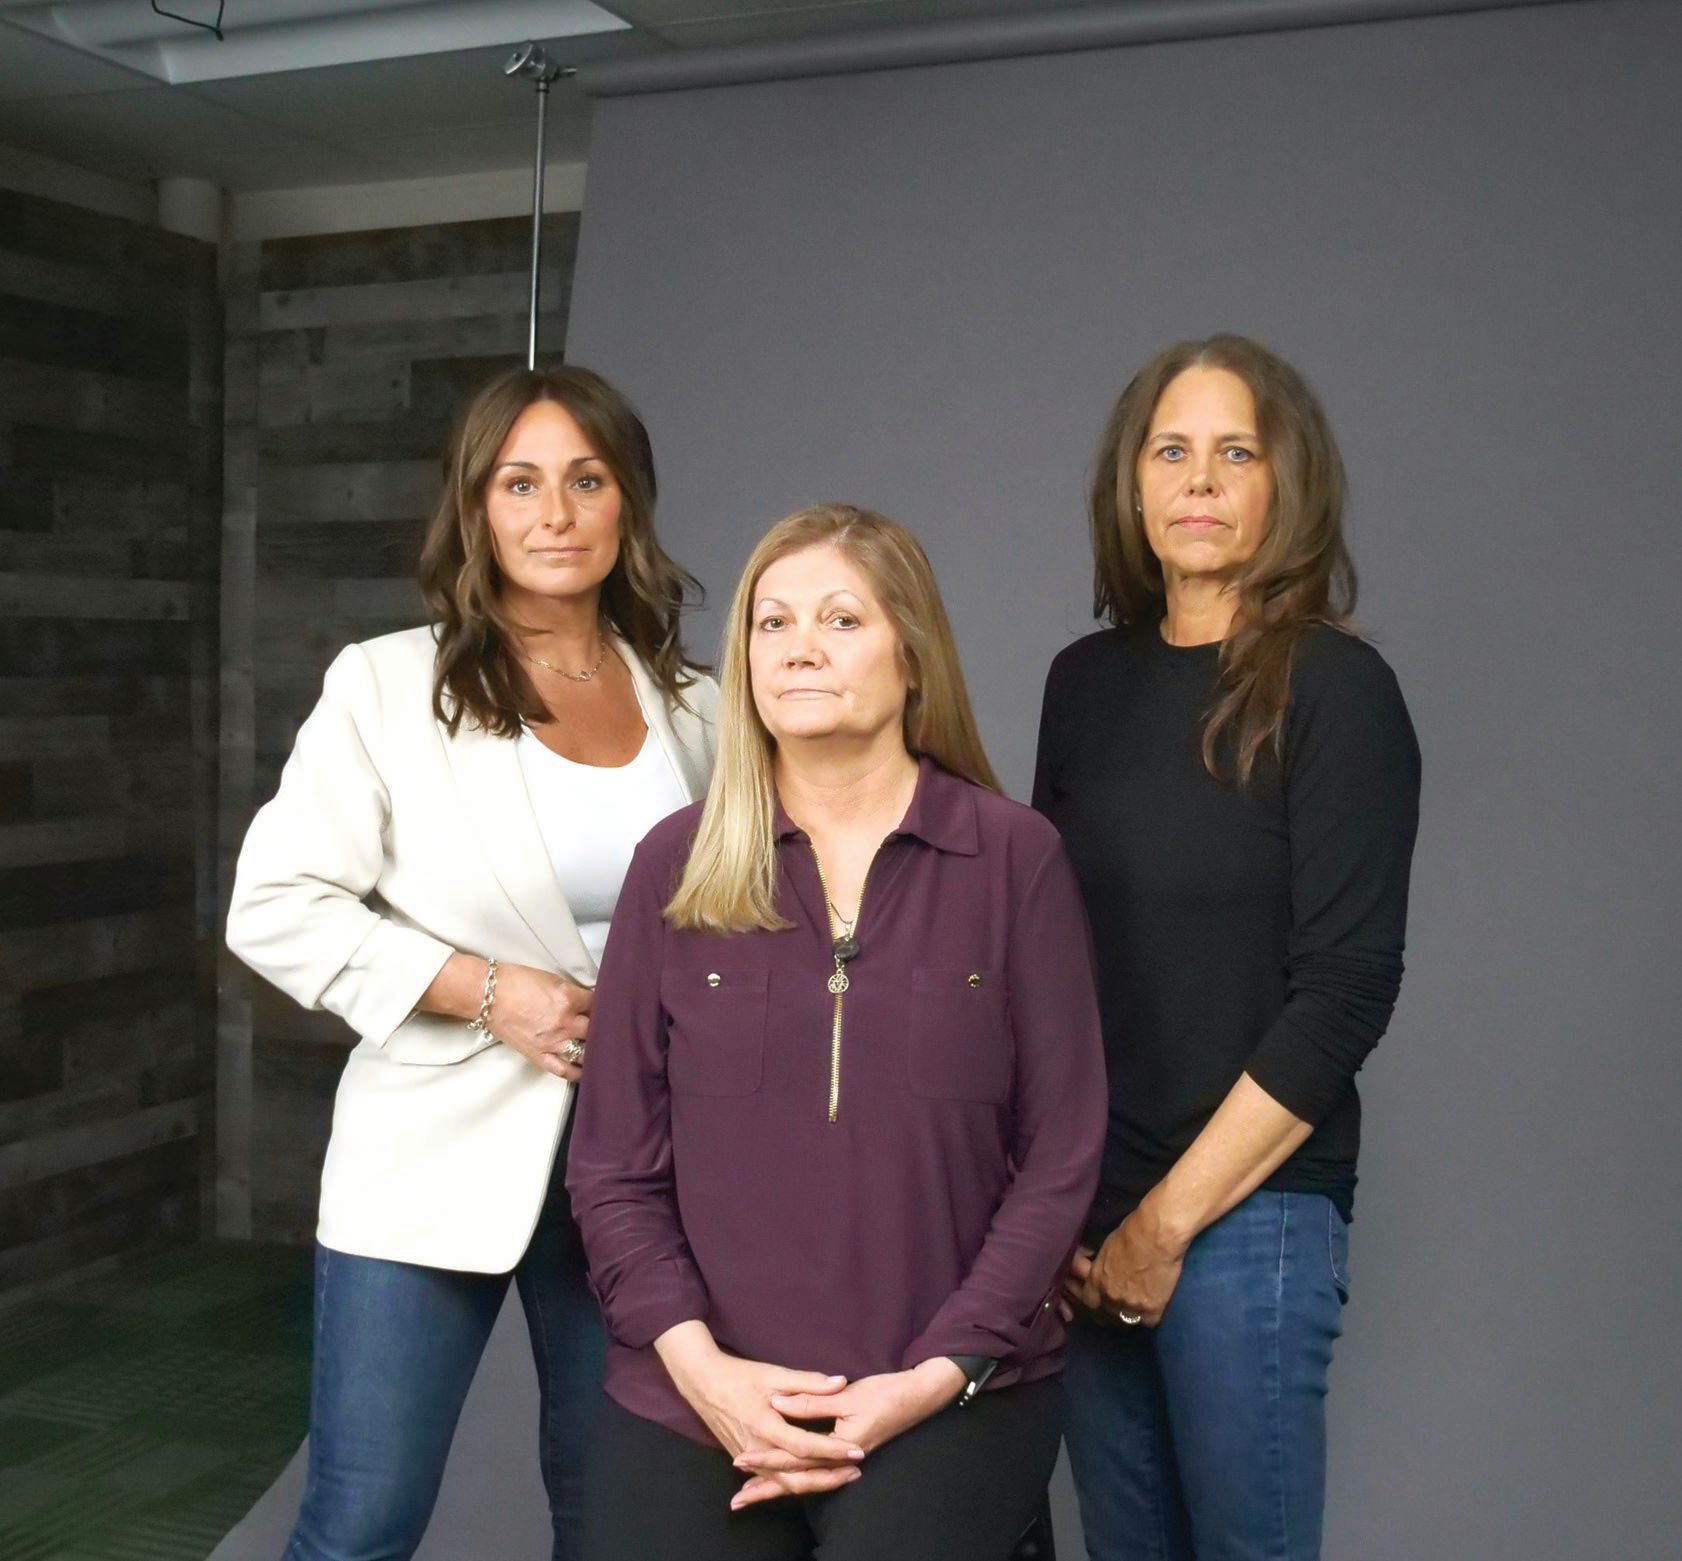 Survivors of domestic violence Amy Cerullo, Barbara Mattson and Nicole Behrens, featured in Markie Hancock’s documentary The Power of Community PHOTO COURTESY OF THE POWER OF COMMUNITY